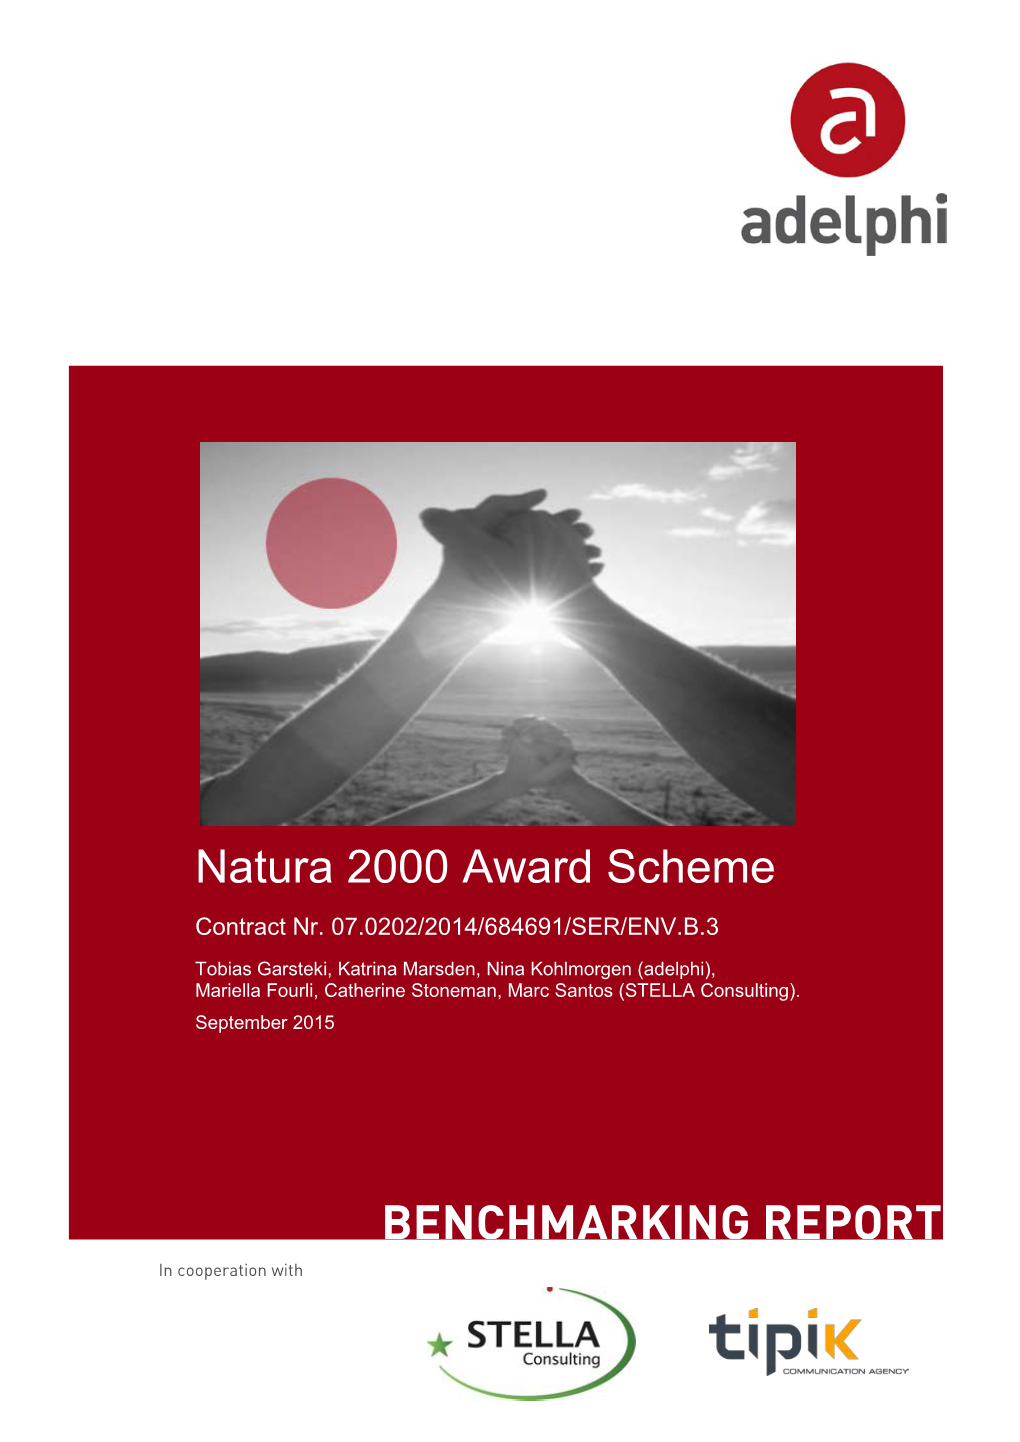 Benchmarking Report for the 2015 Award